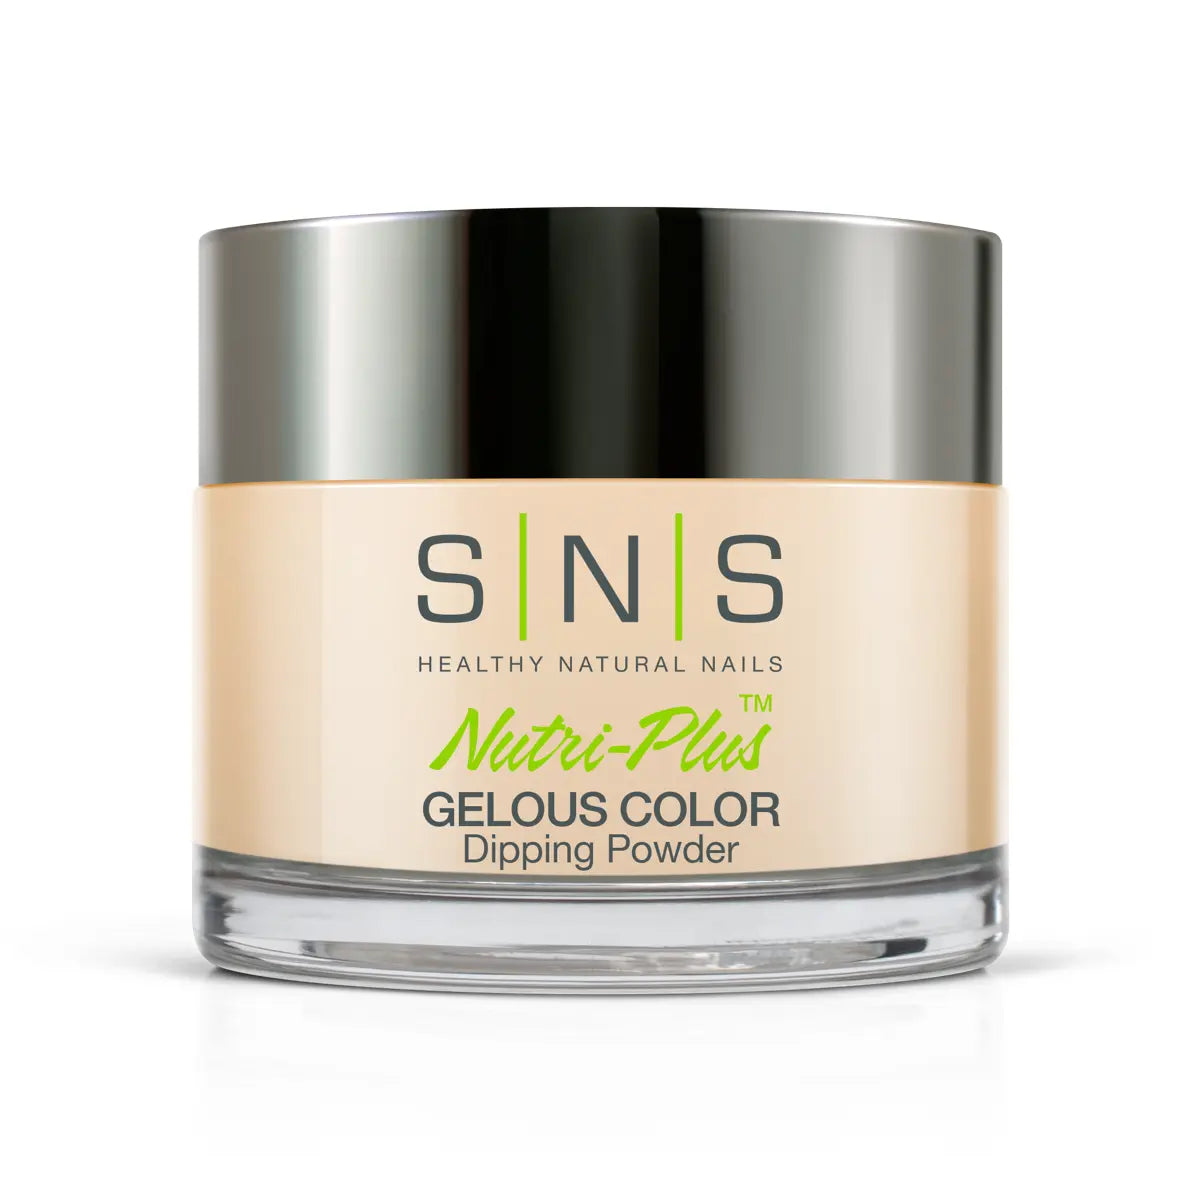 SNS 3 in 1 - DR23 Rooted in Beauty - Dip (1.5oz), Gel & Lacquer Matching